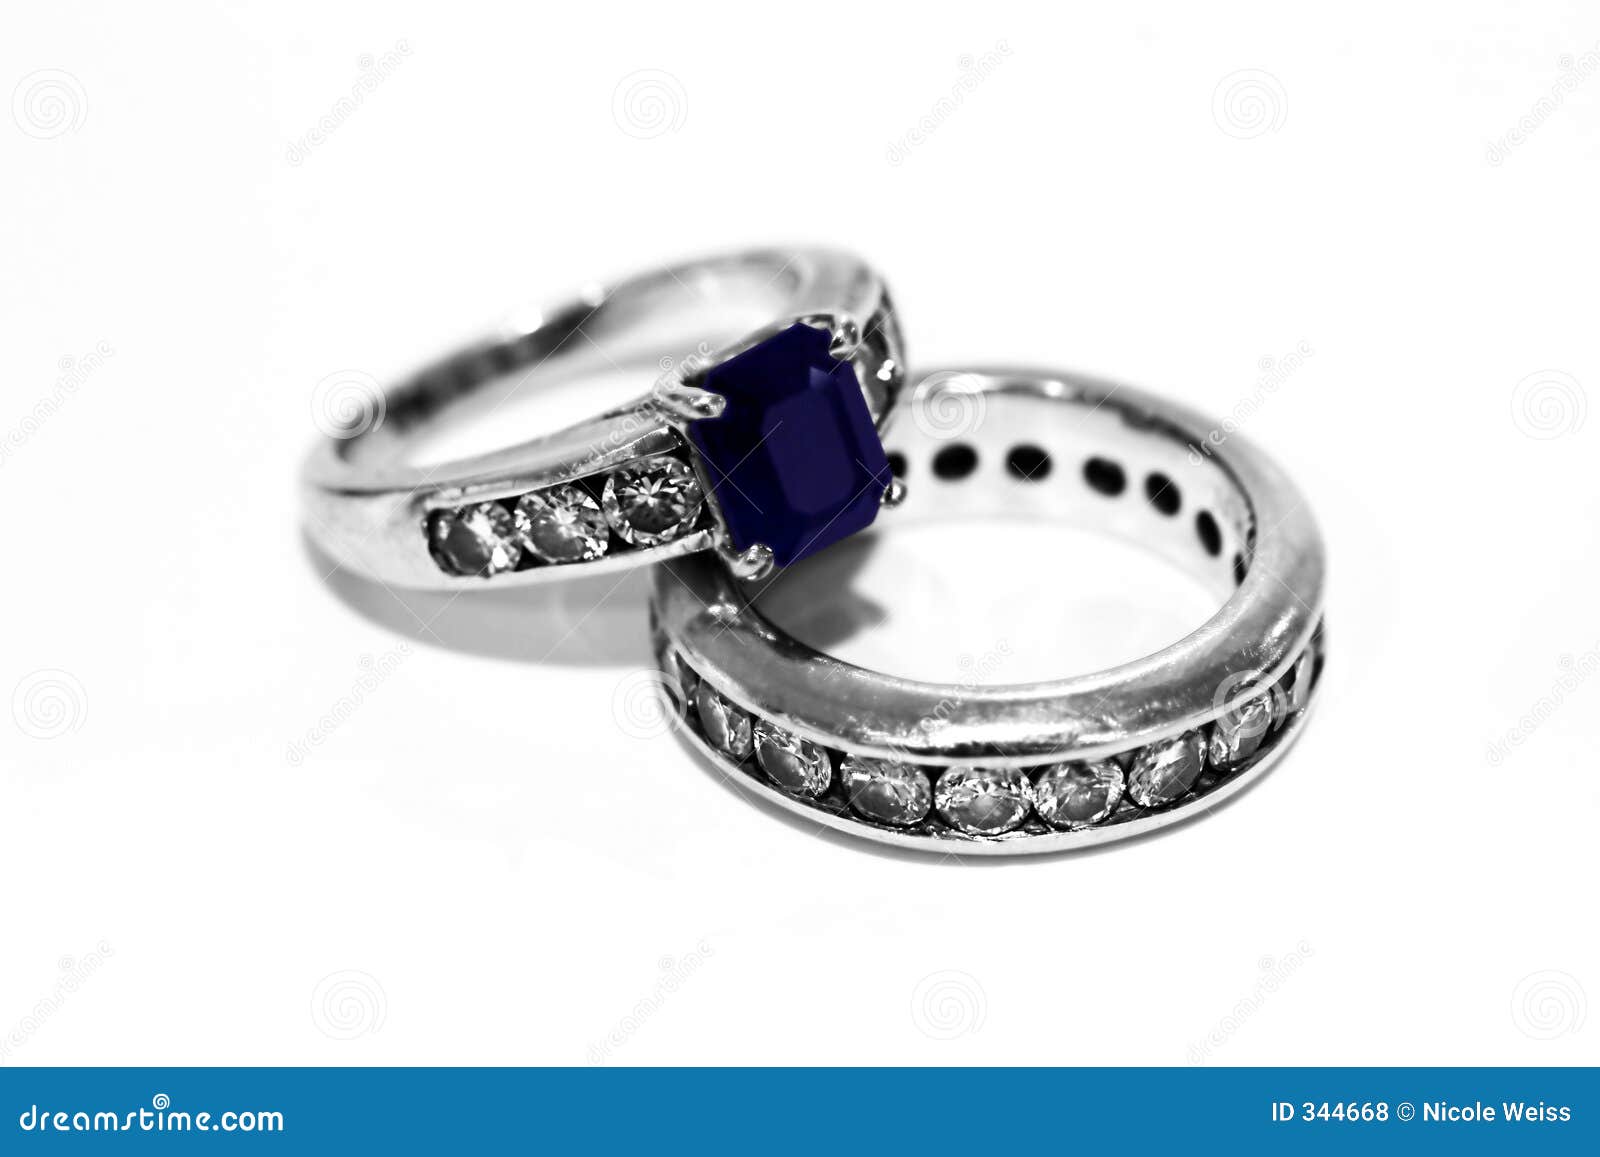 Wedding Rings with Diamonds and Sapphire.